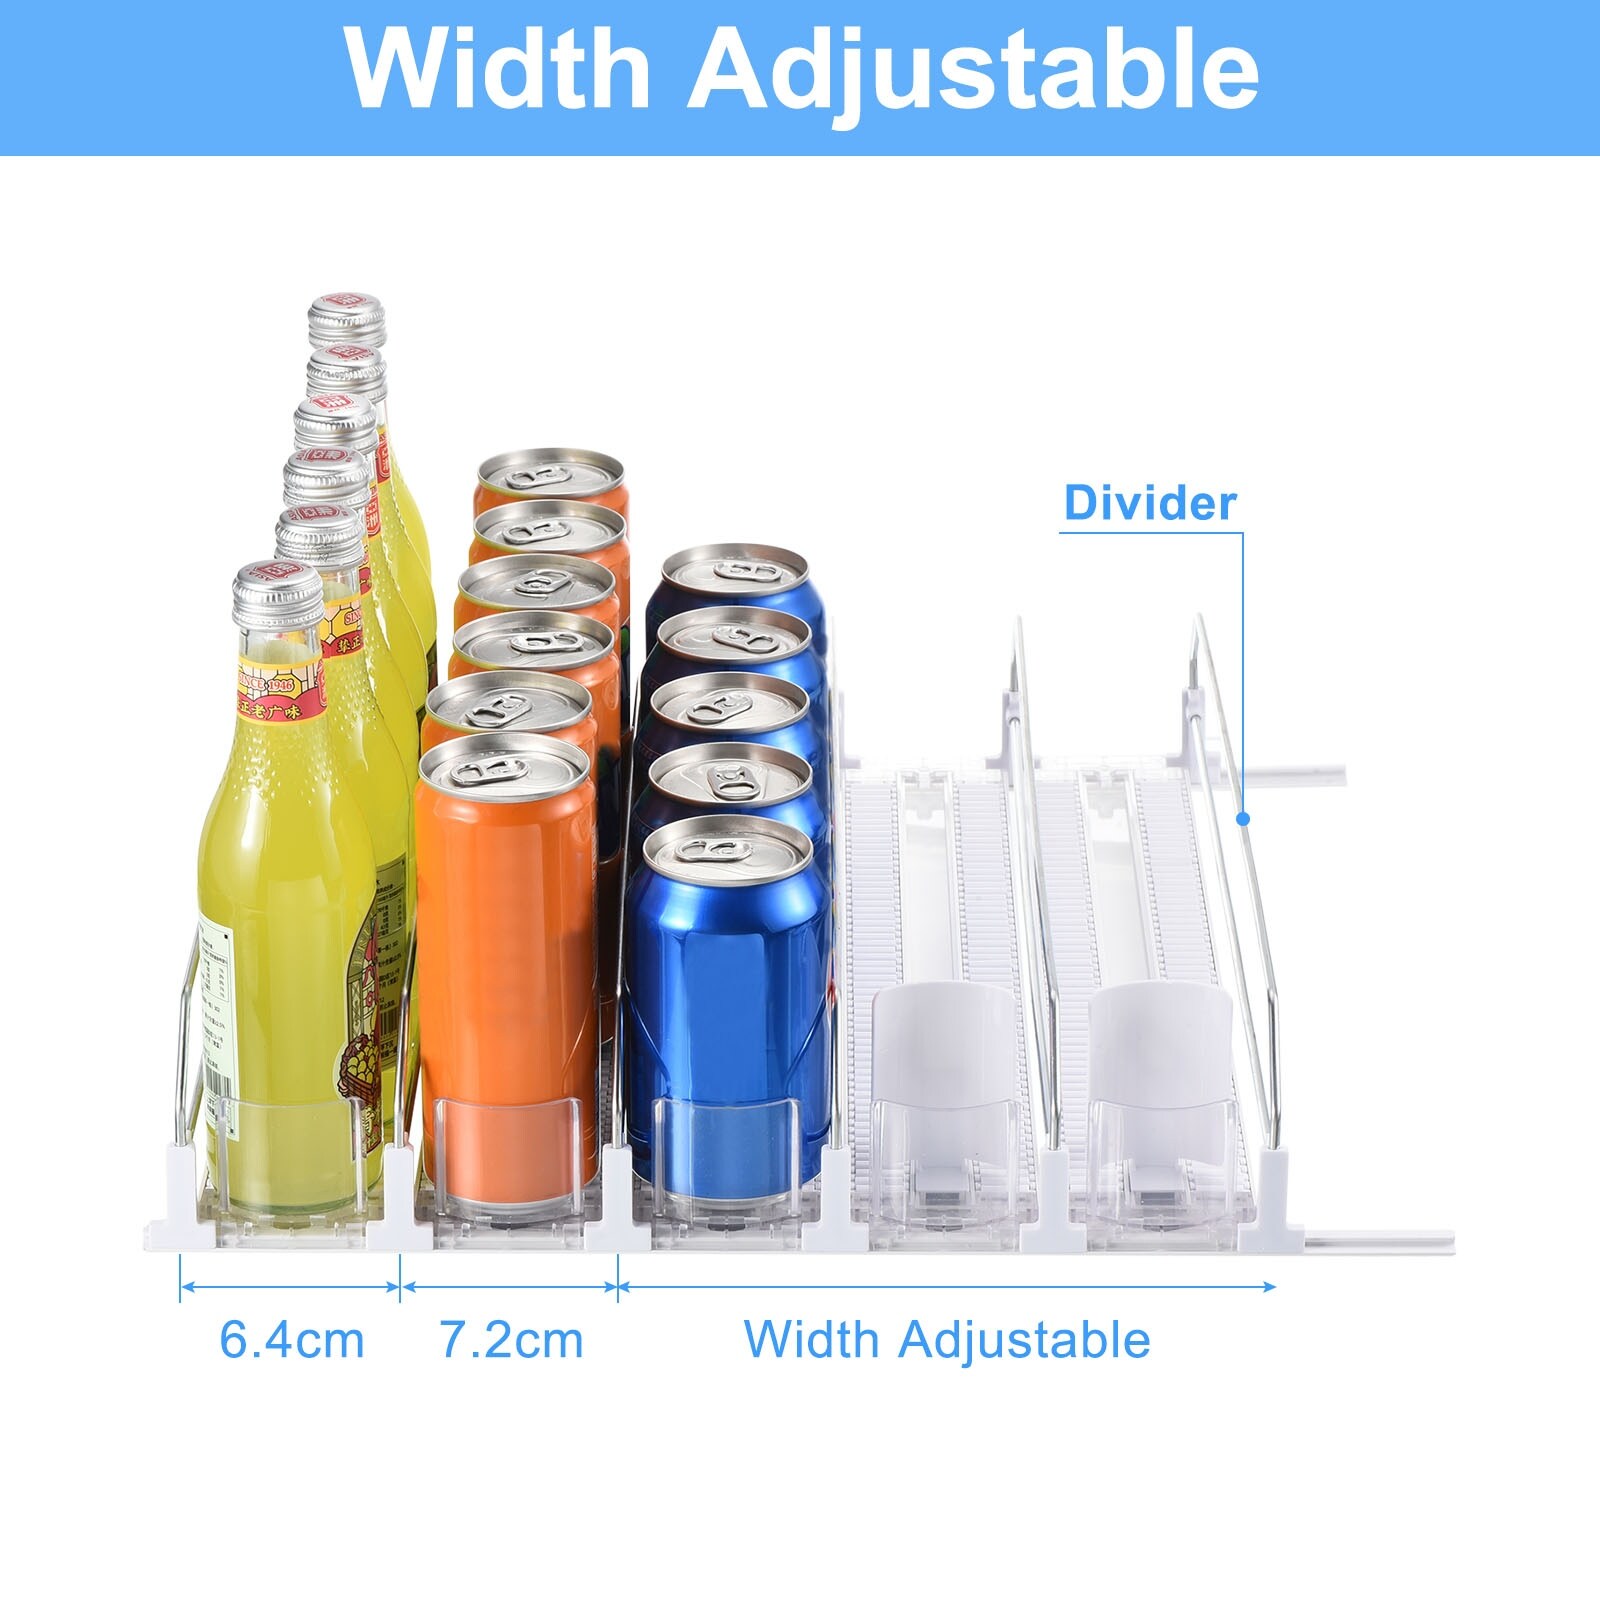 https://ak1.ostkcdn.com/images/products/is/images/direct/d83e3af31966941b1958dd90a273bc1c2b2271b0/5pcs-Drink-Organizer-for-Fridge-Self-Pushing-Soda-Can-Dispenser%2C-White.jpg